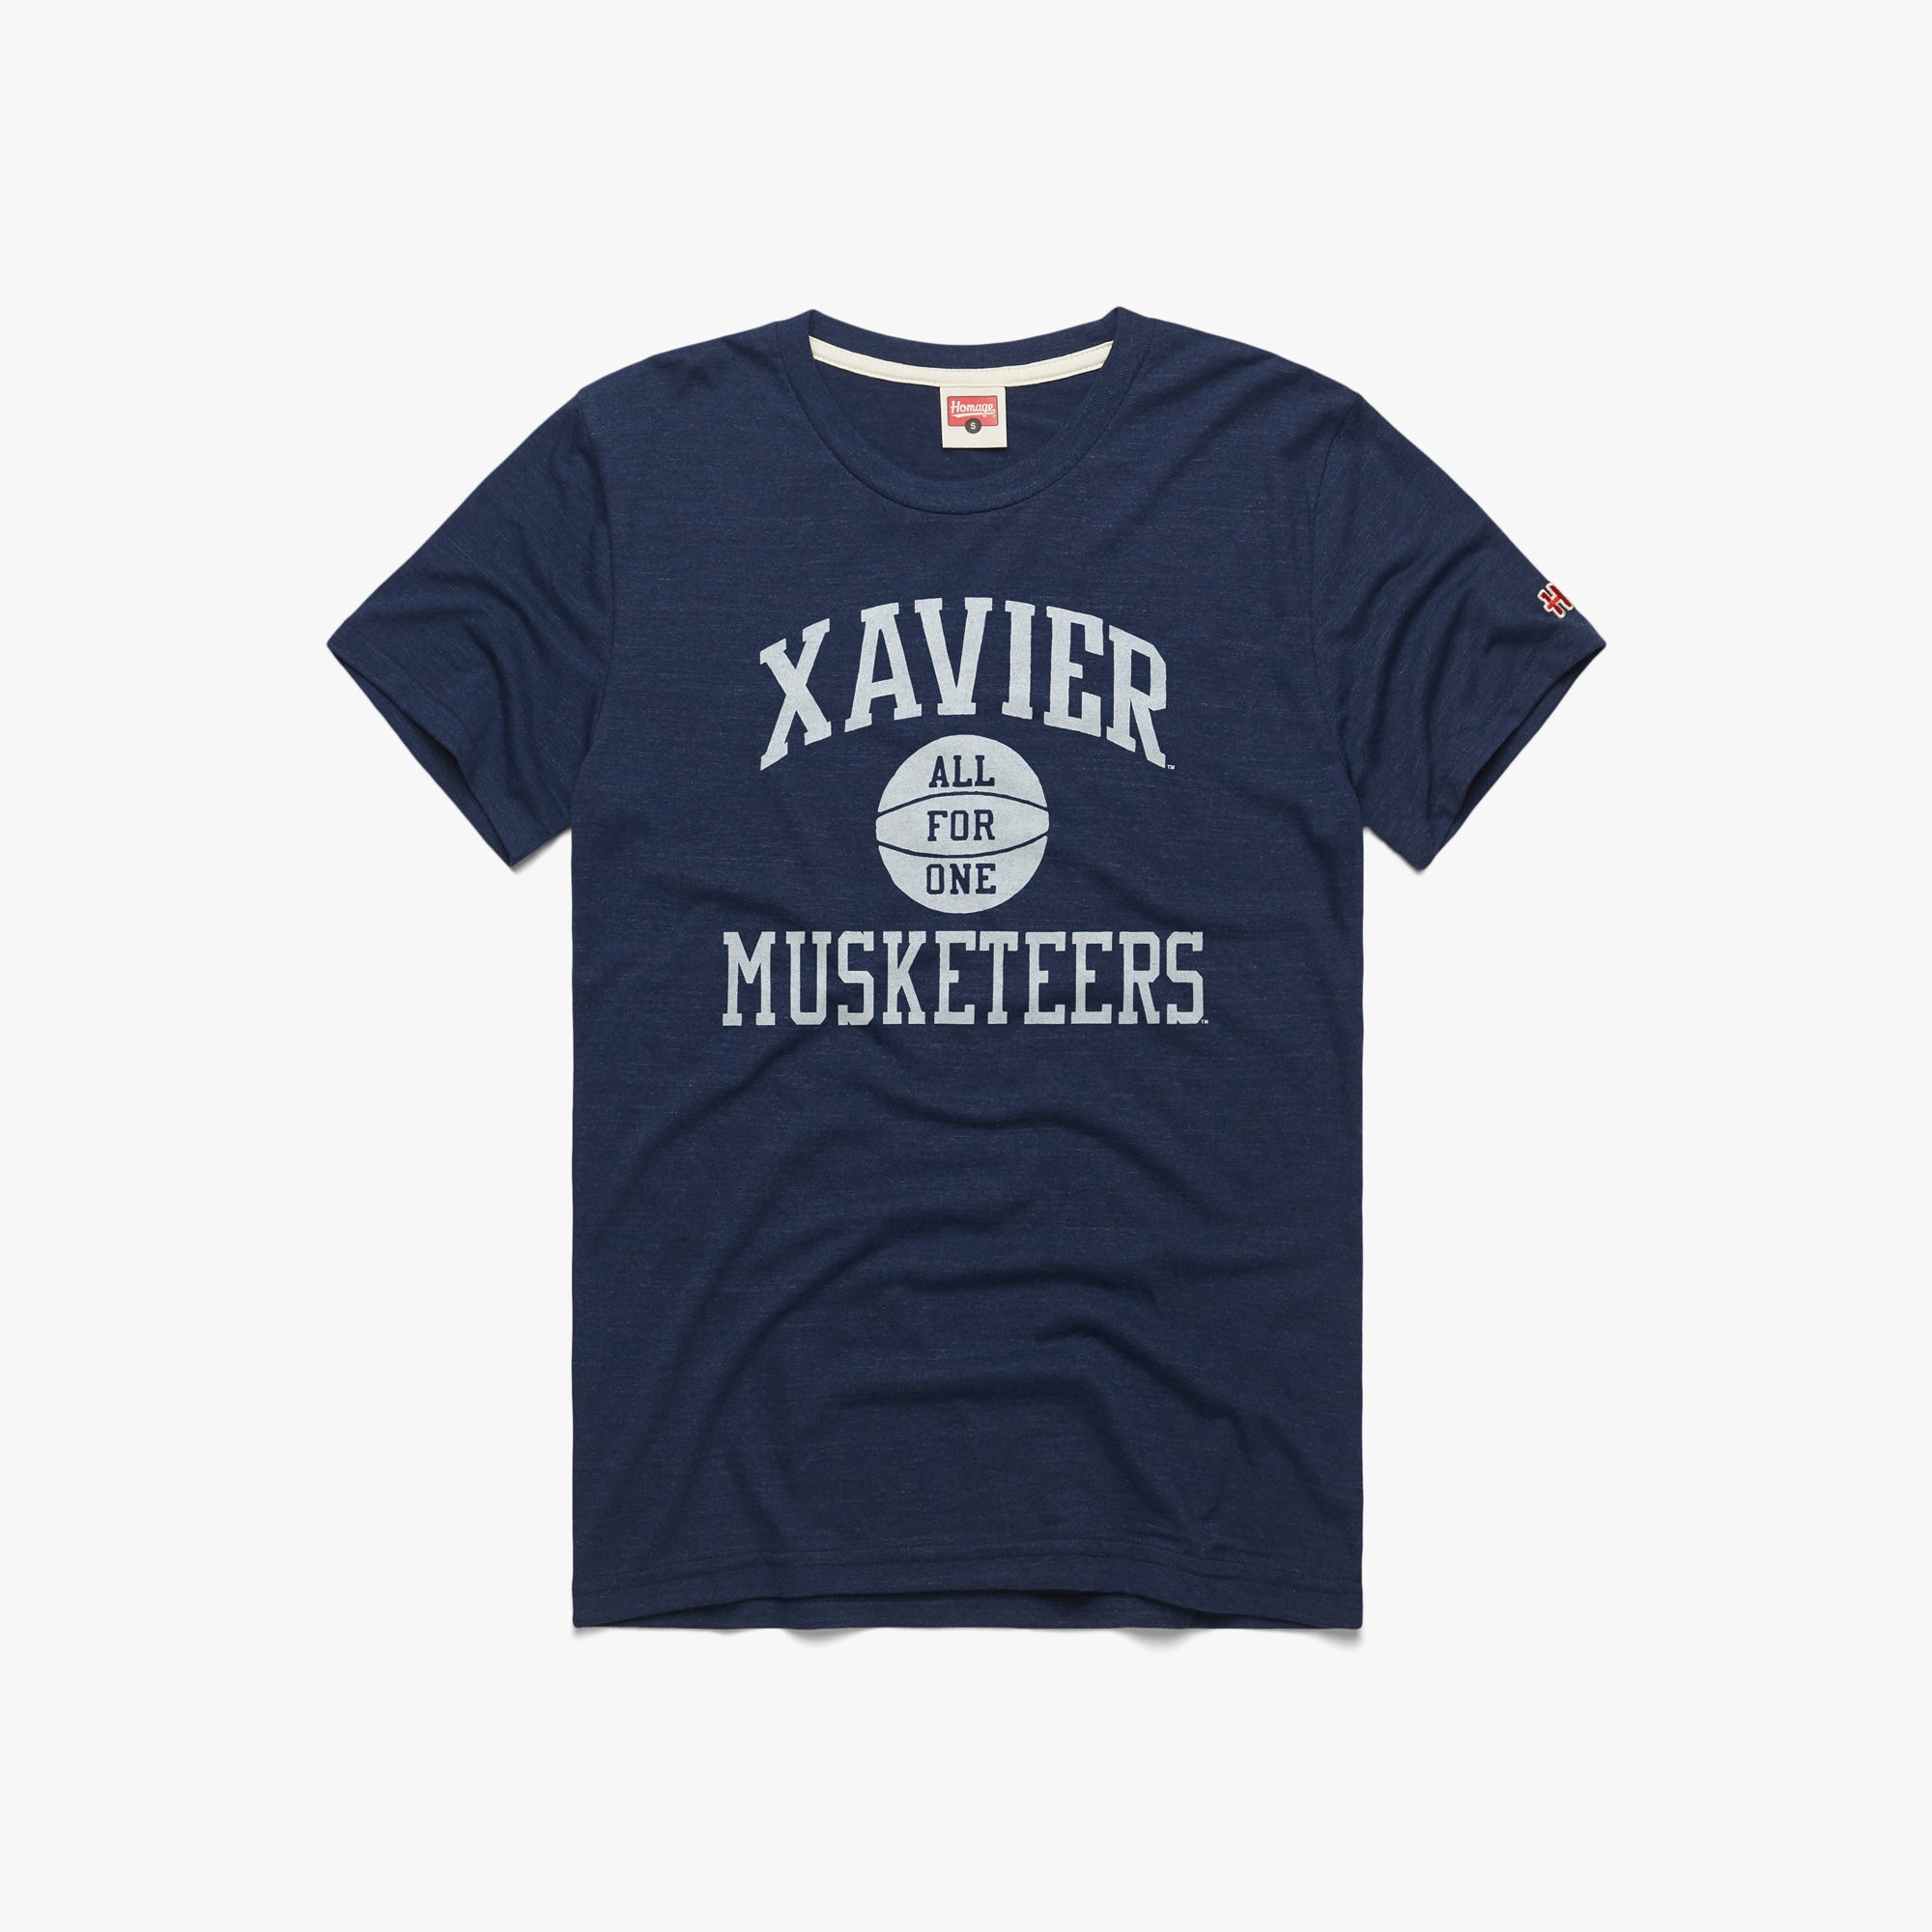 Xavier All For One Musketeers